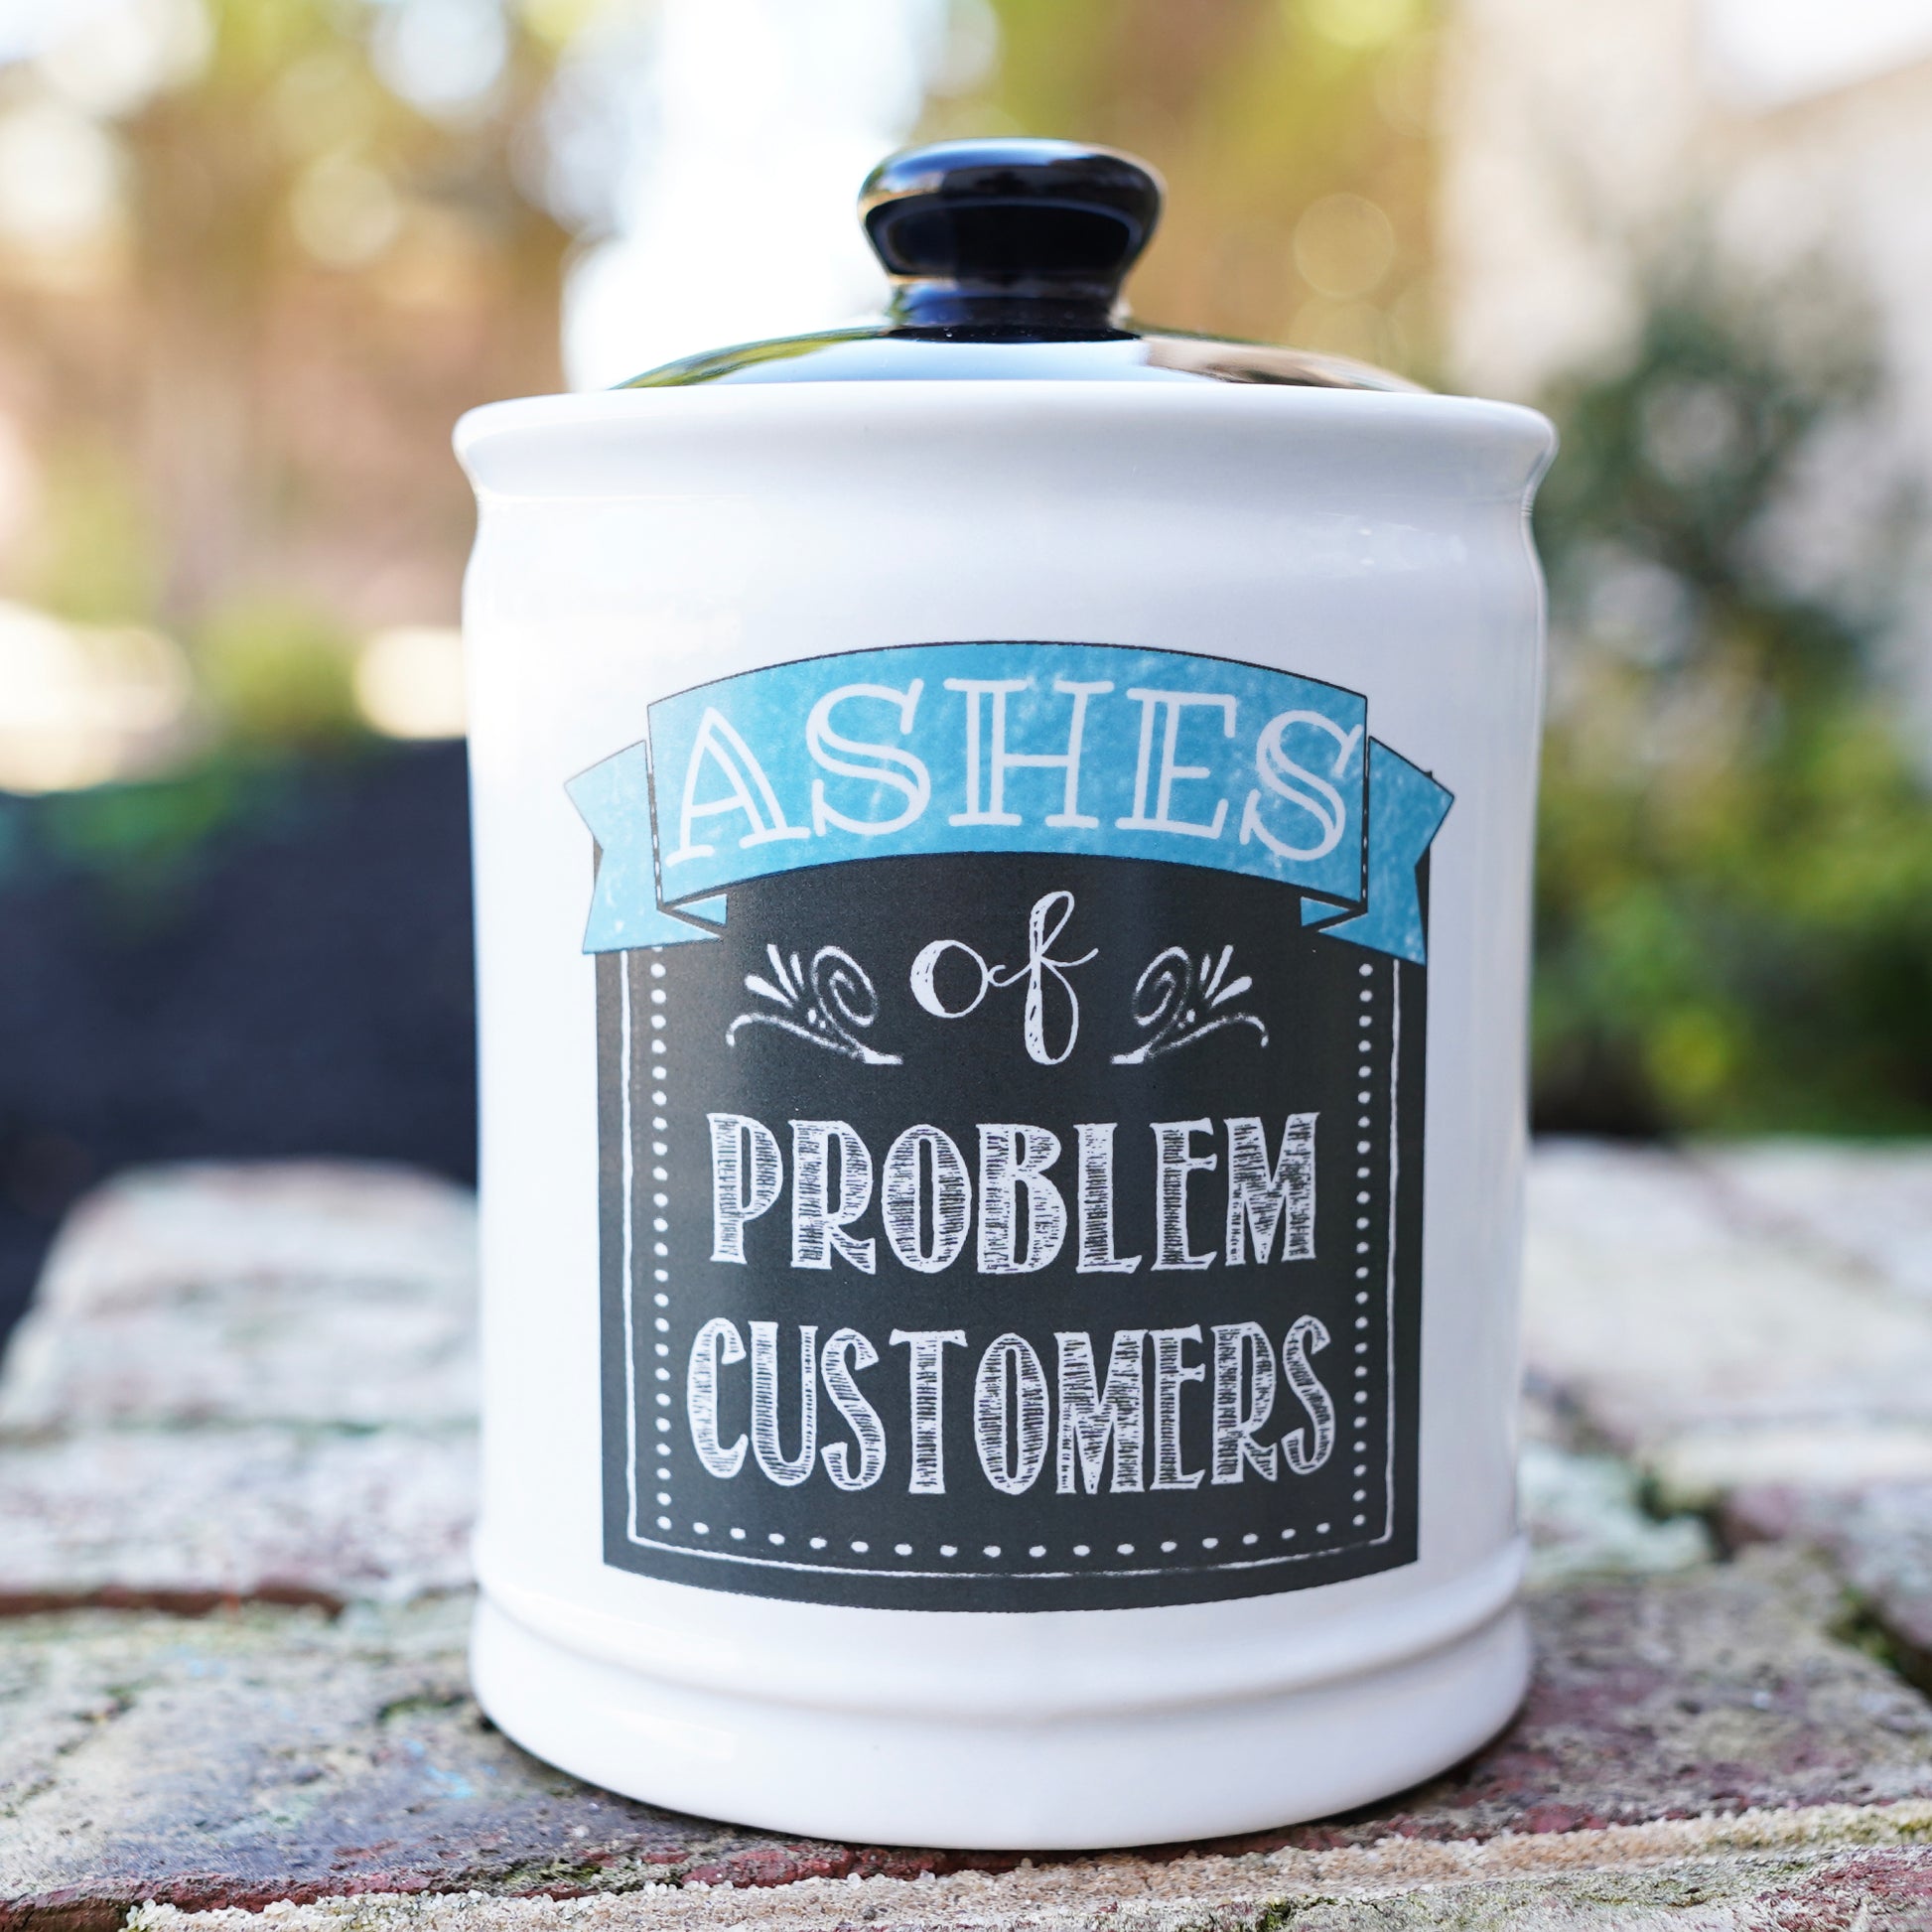 Cottage Creek Ashes of Problem Employees Piggy Bank, Ceramic Candy Jar, Fun Gifts